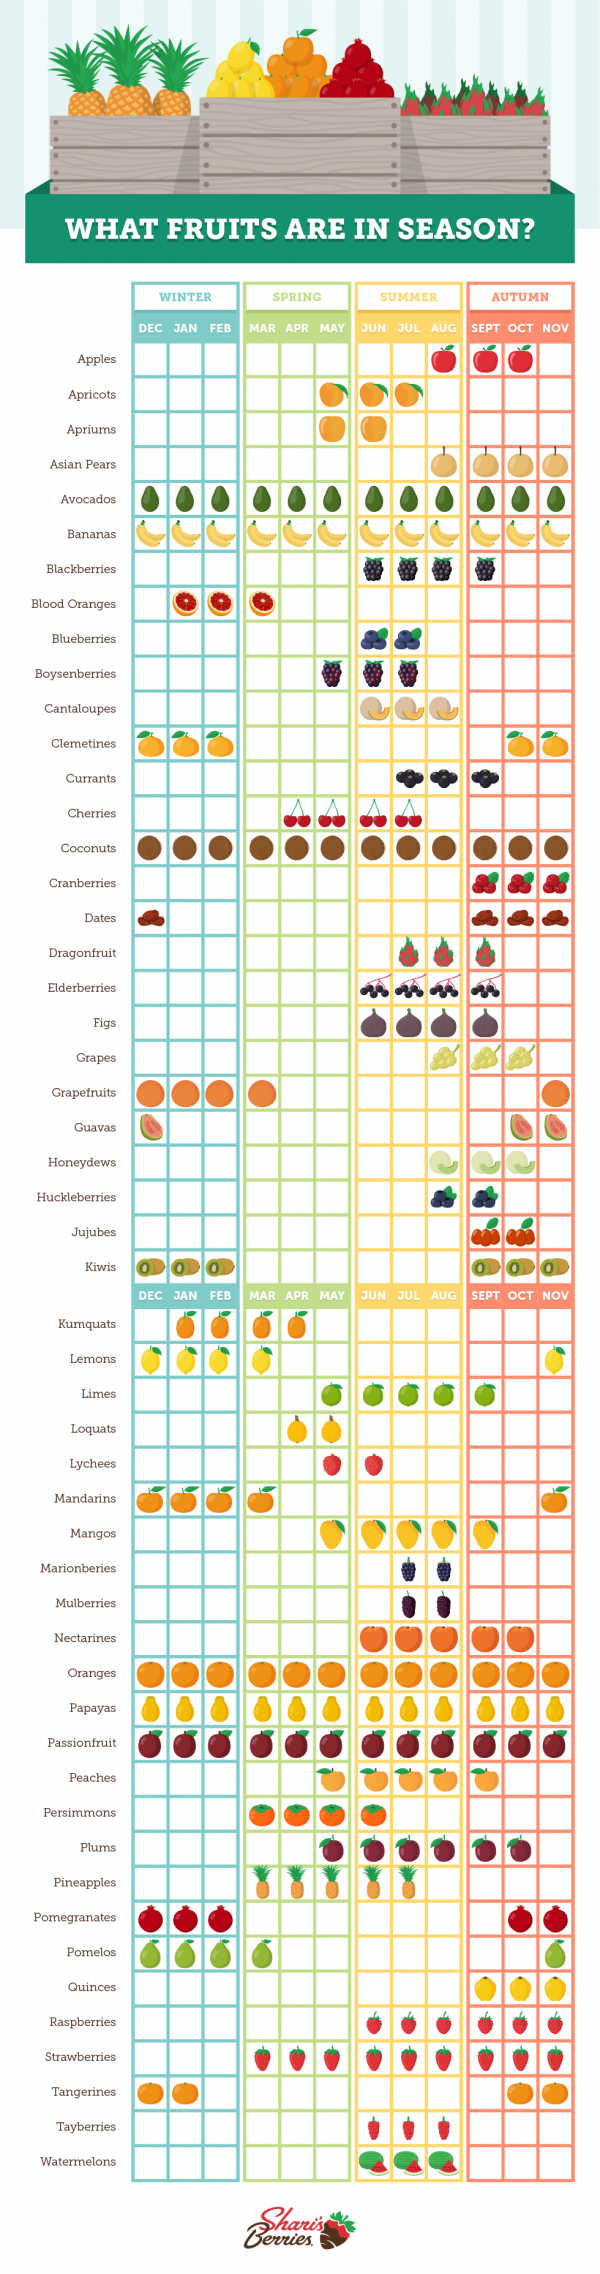 What Fruits Are In Season? Easy Reference Chart Shari's Berries